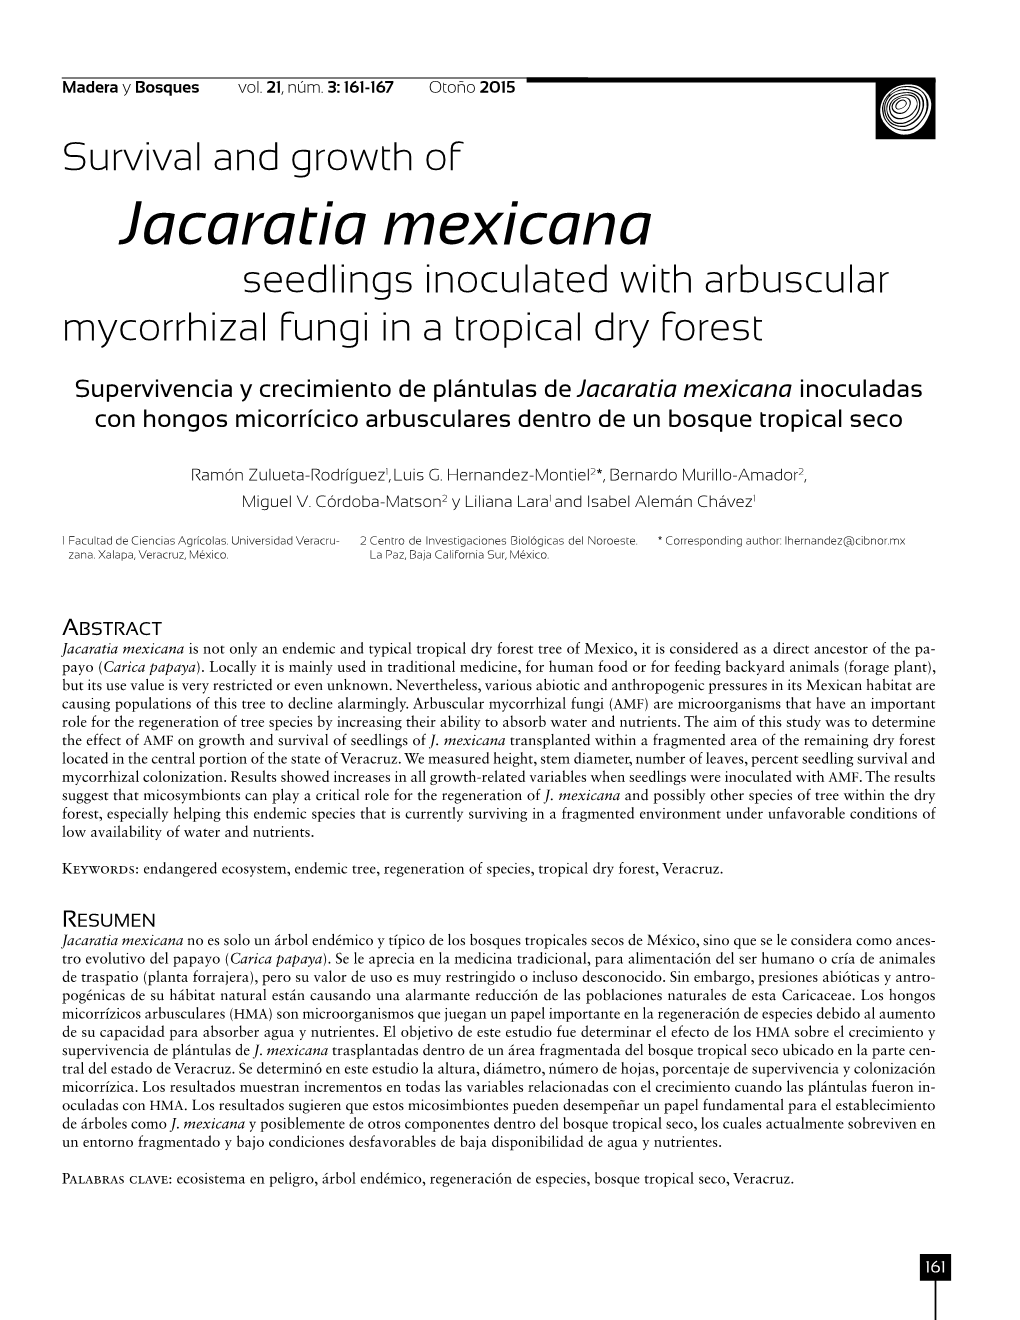 Jacaratia Mexicana Seedlings Inoculated with Arbuscular Mycorrhizal Fungi in a Tropical Dry Forest